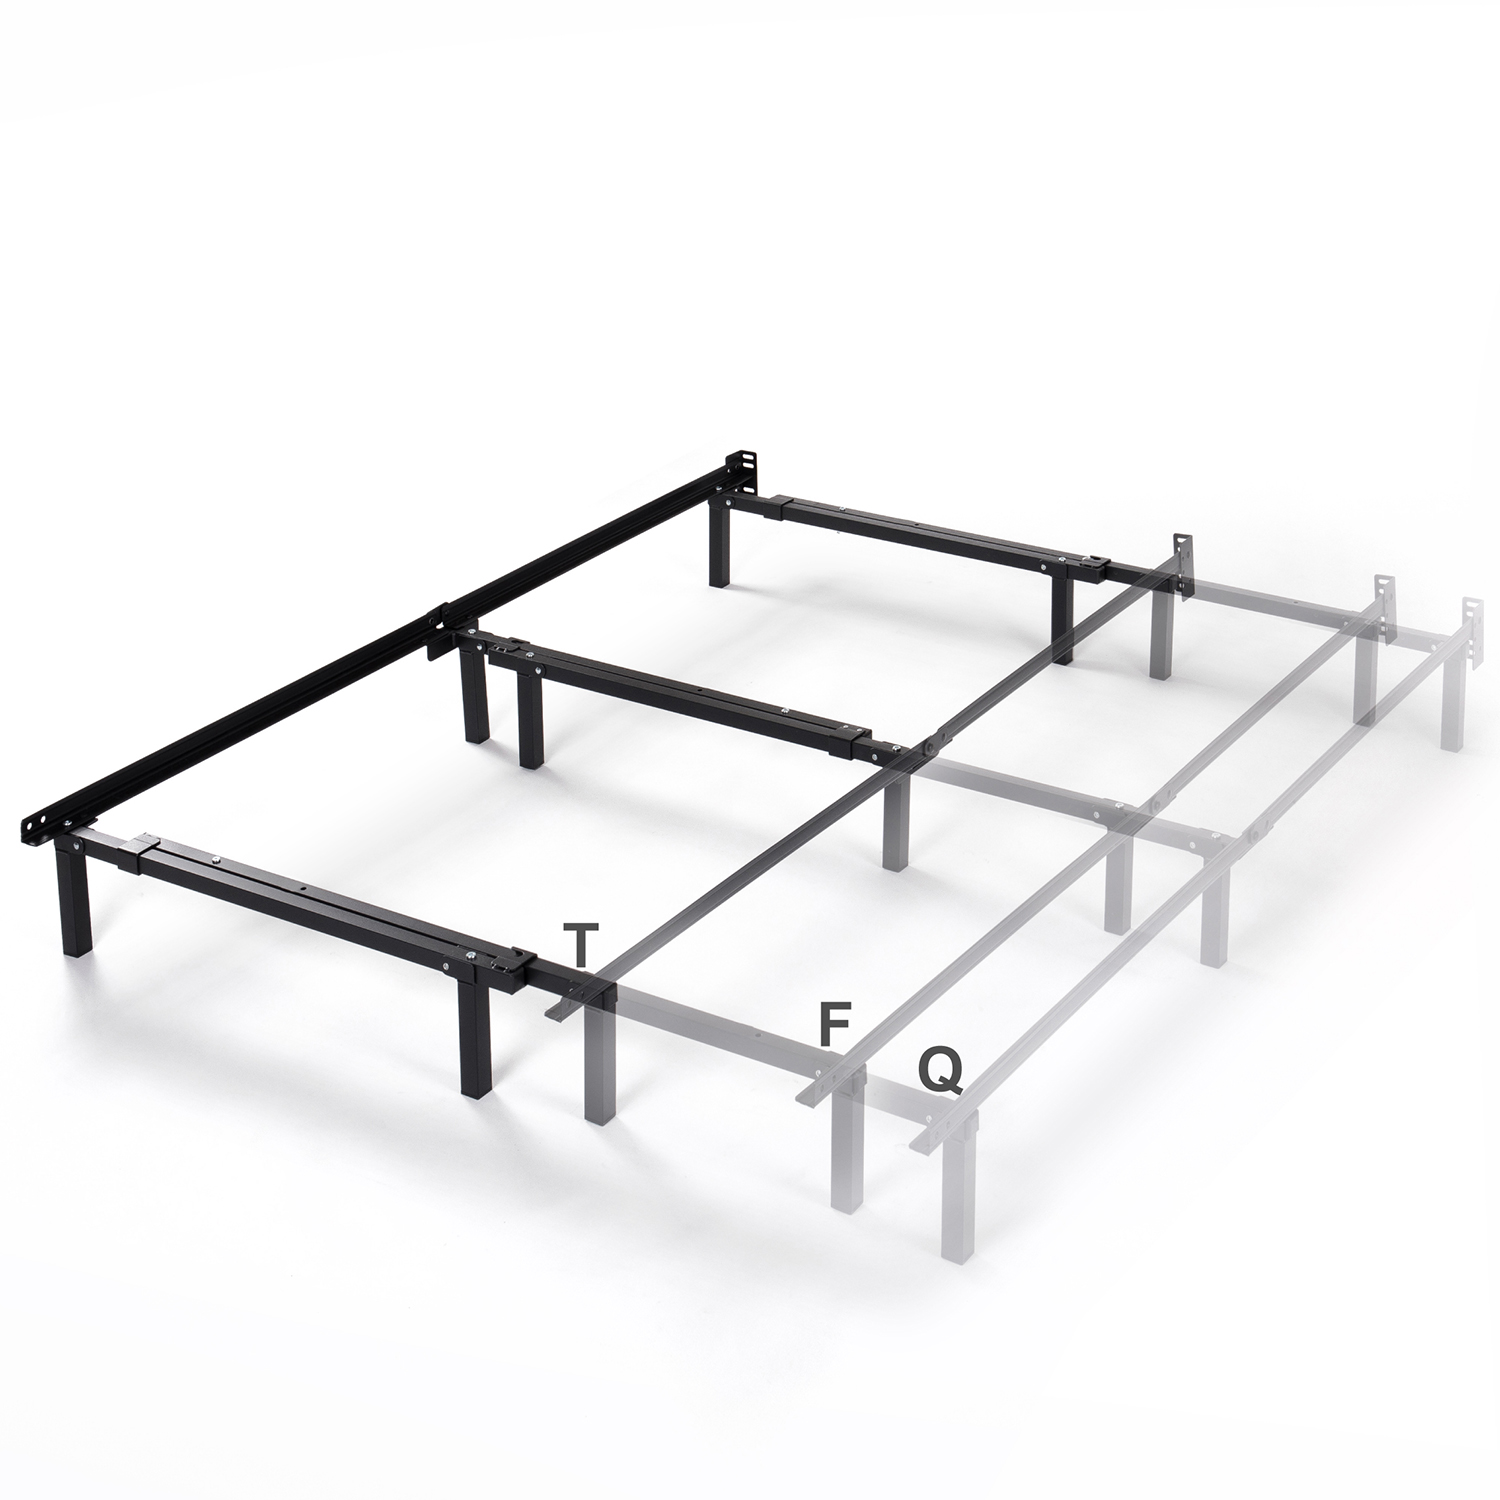 Spa Sensations by Zinus 7" Adjustable Bed Frame for Twin - Queen Sizes - image 3 of 8